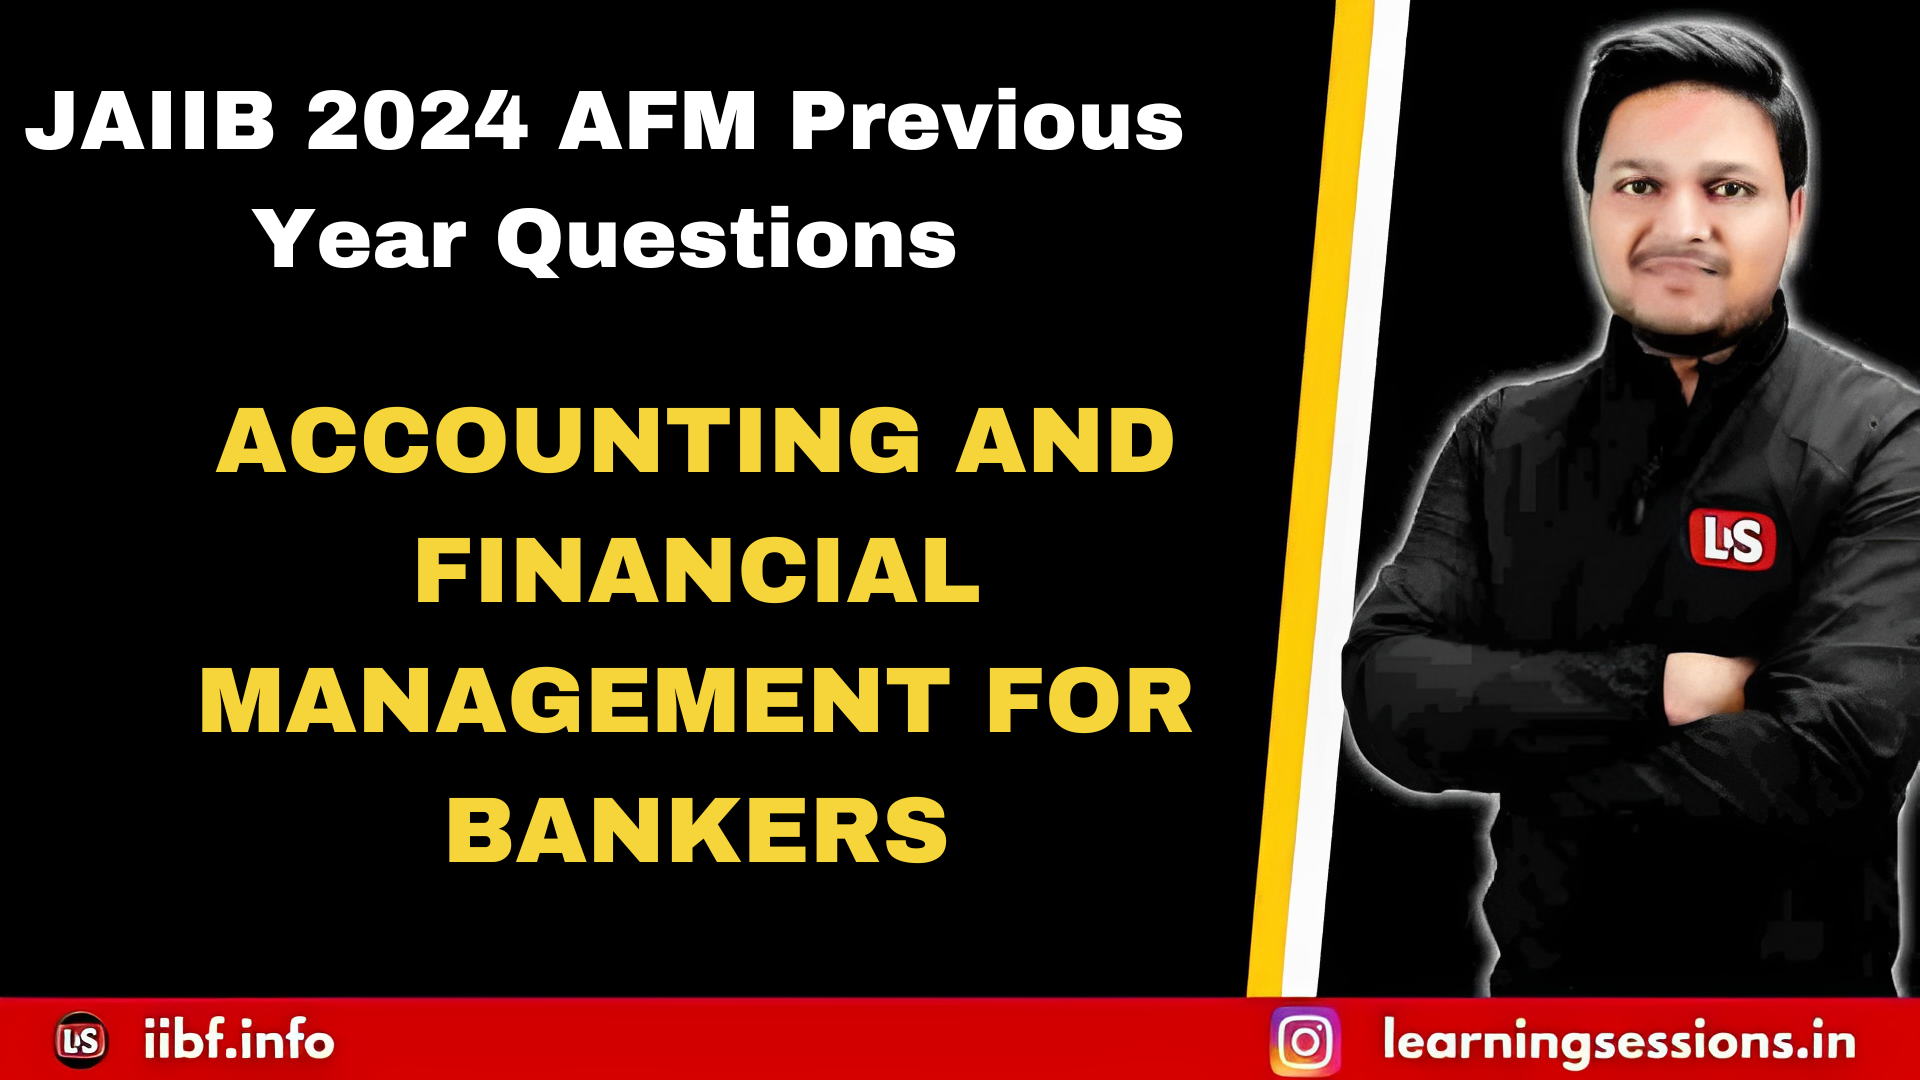 ACCOUNTING AND FINANCIAL MANAGEMENT FOR BANKERS